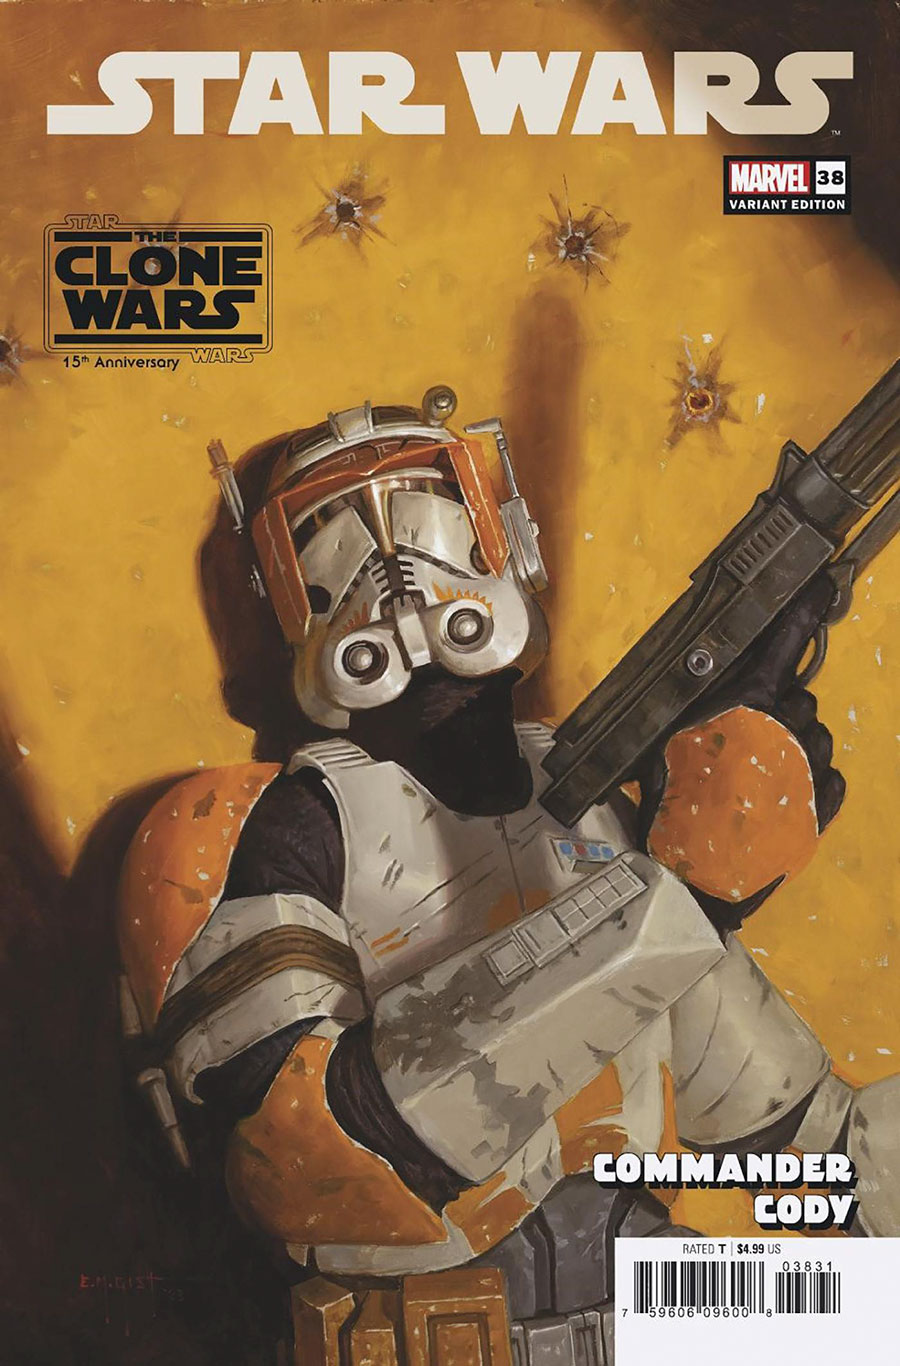 Star Wars Vol 5 #38 Cover C Variant EM Gist Star Wars Clone Wars 15th Anniversary Cody Cover (Dark Droids Tie-In)